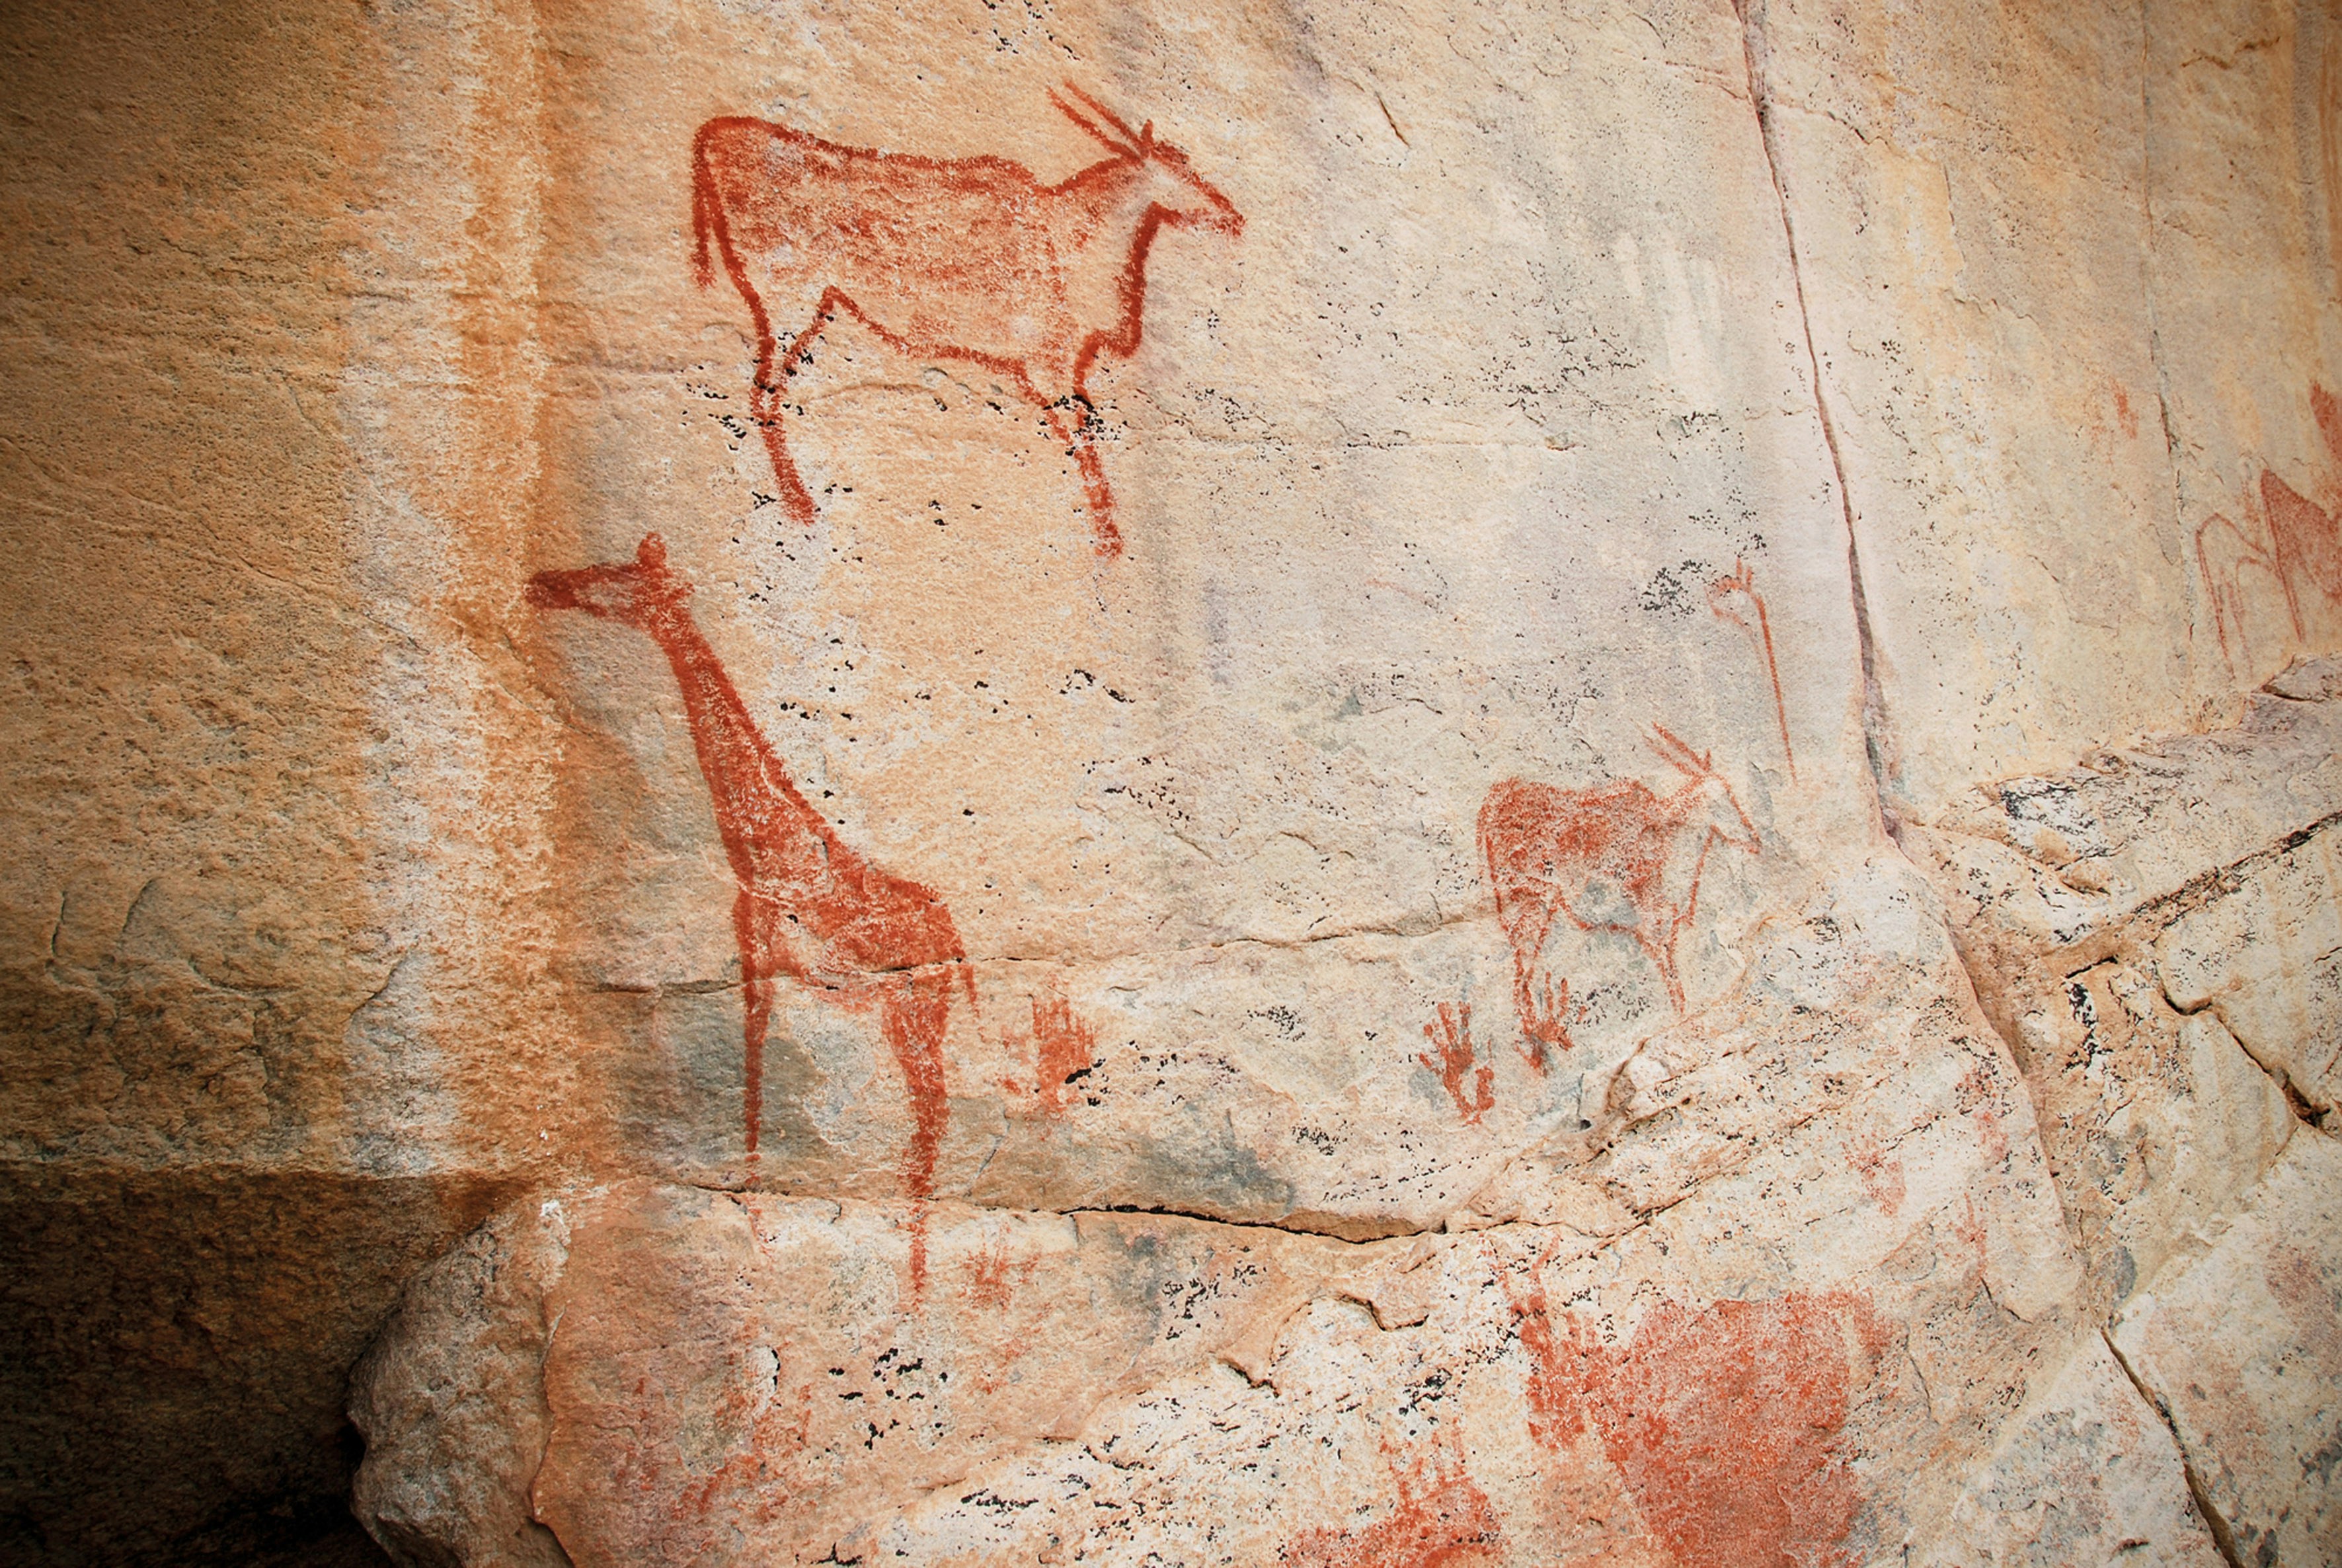 Red painted rock art shows a giraffe, a wildebeest, and other animals scattered on a pale buff rock in Botswana